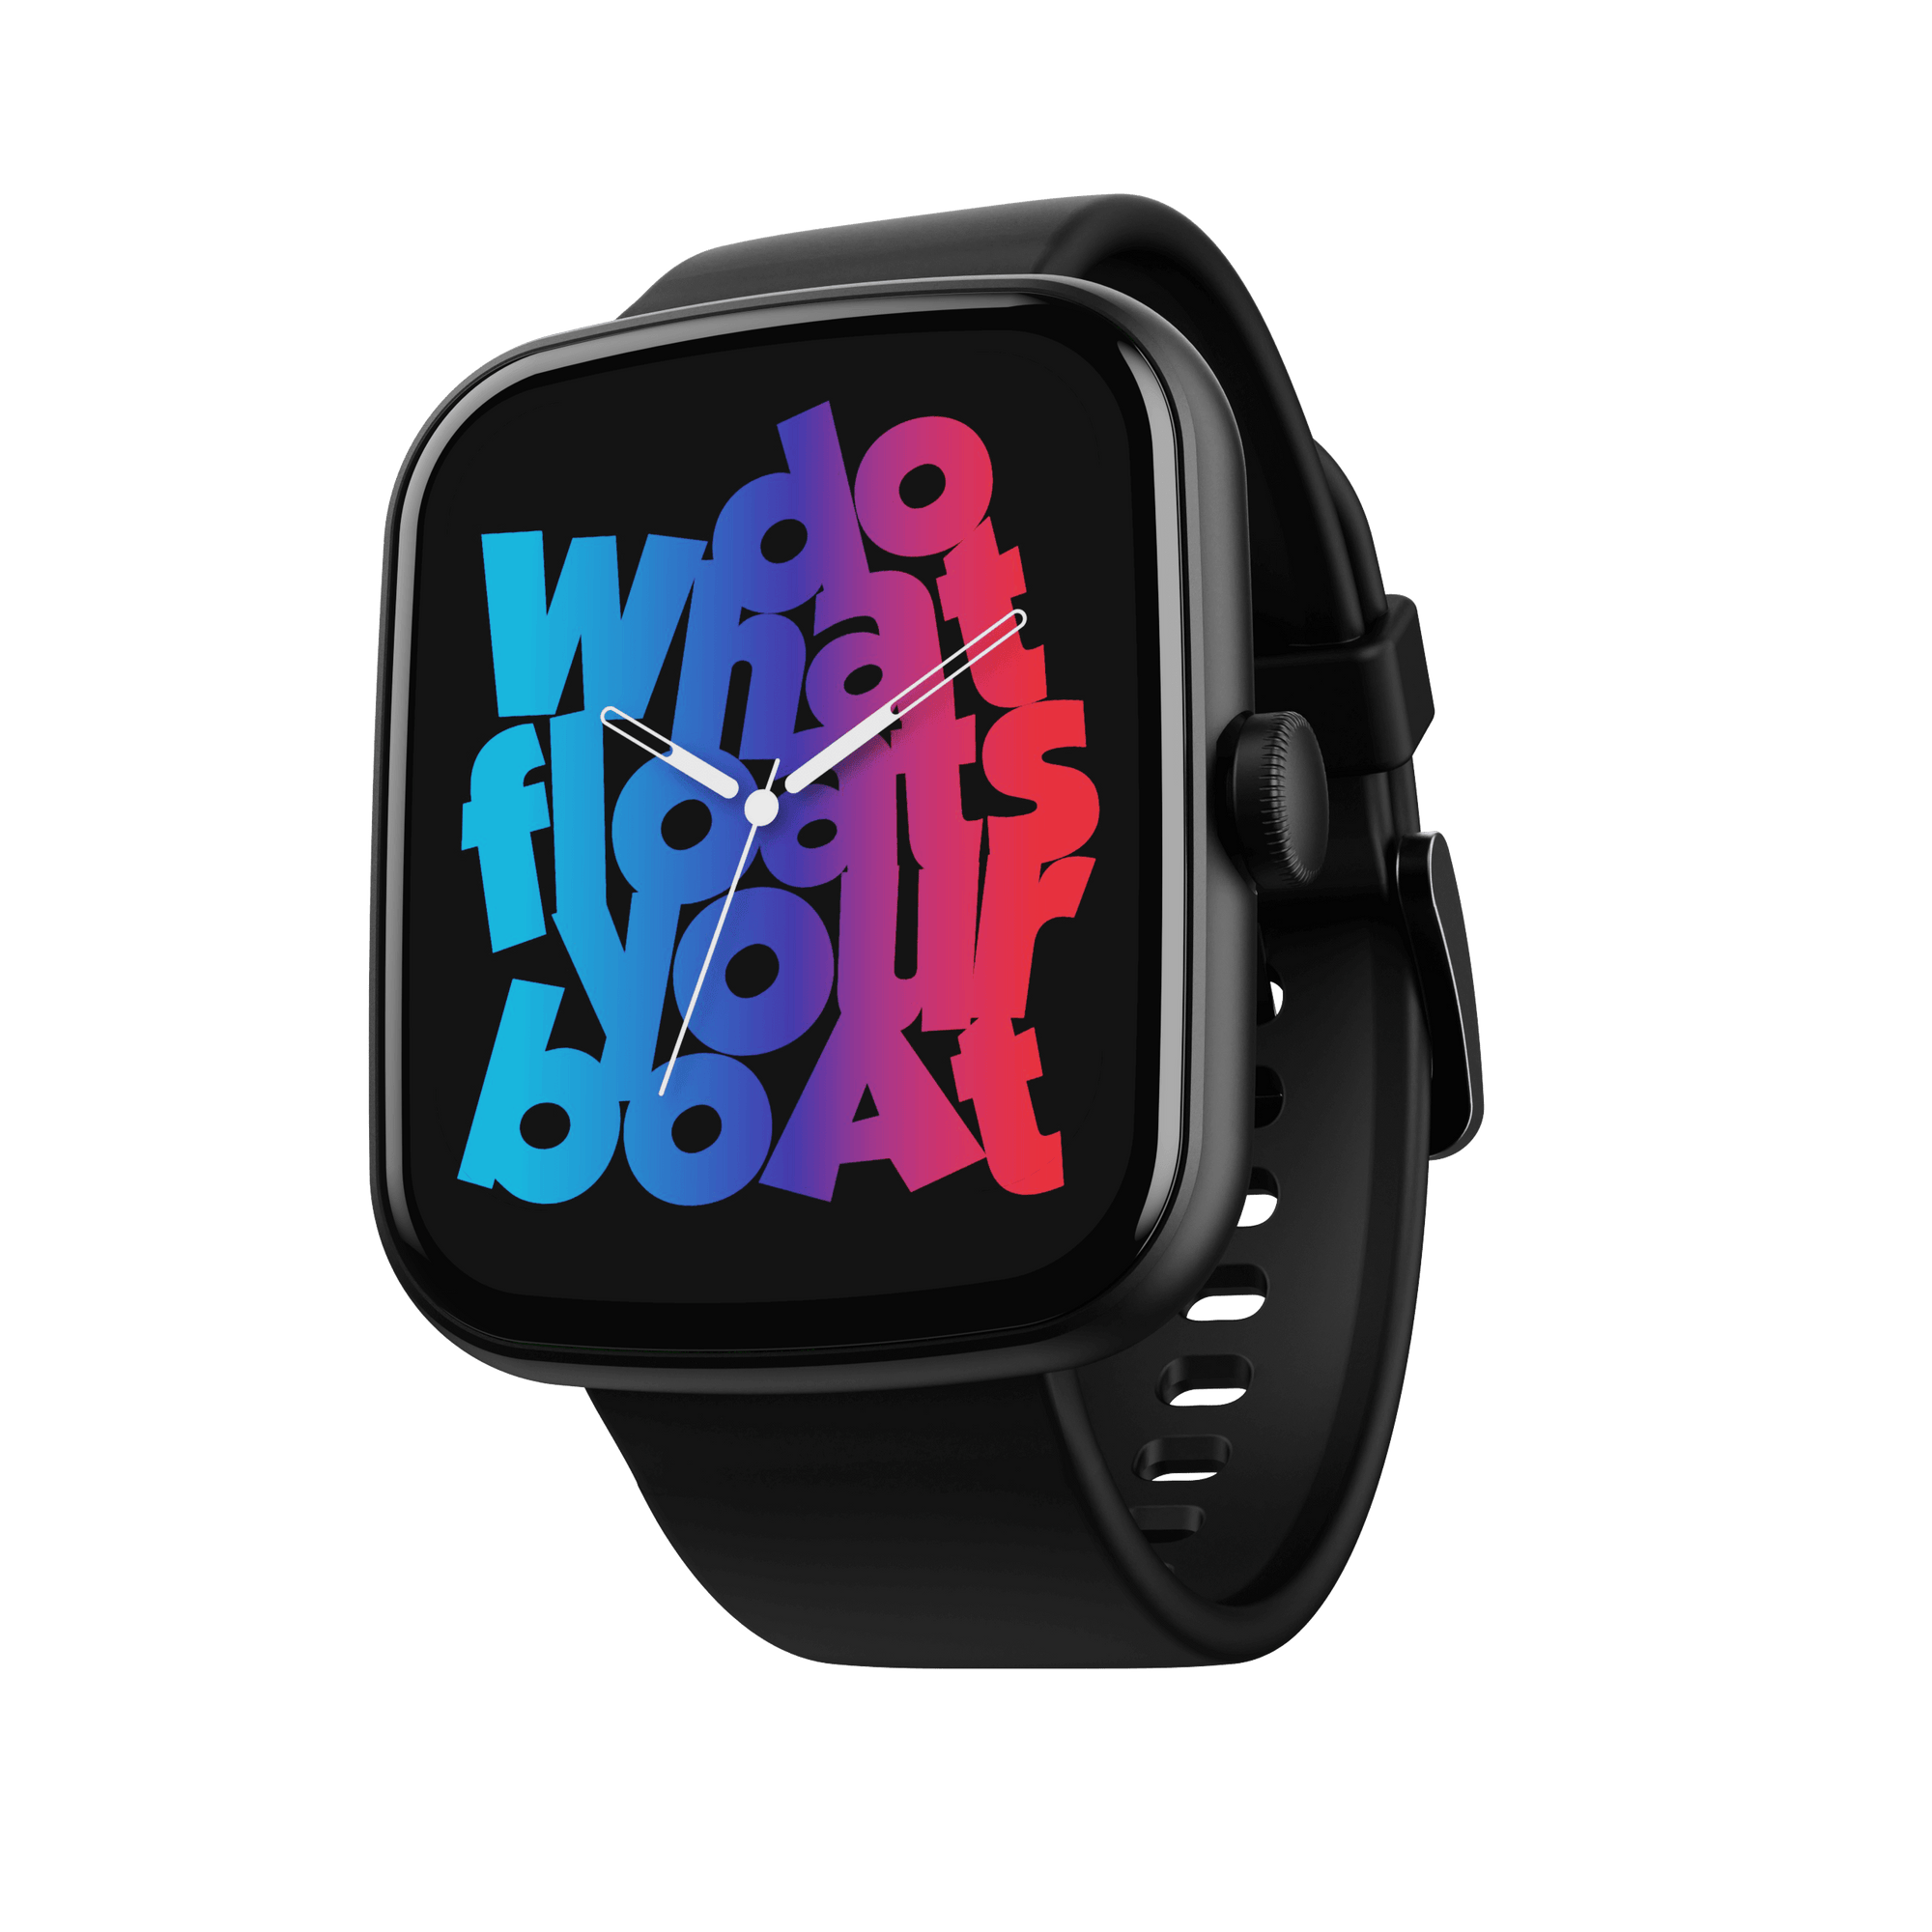 Android Developers Blog: Introducing the Watch Face Format for Wear OS